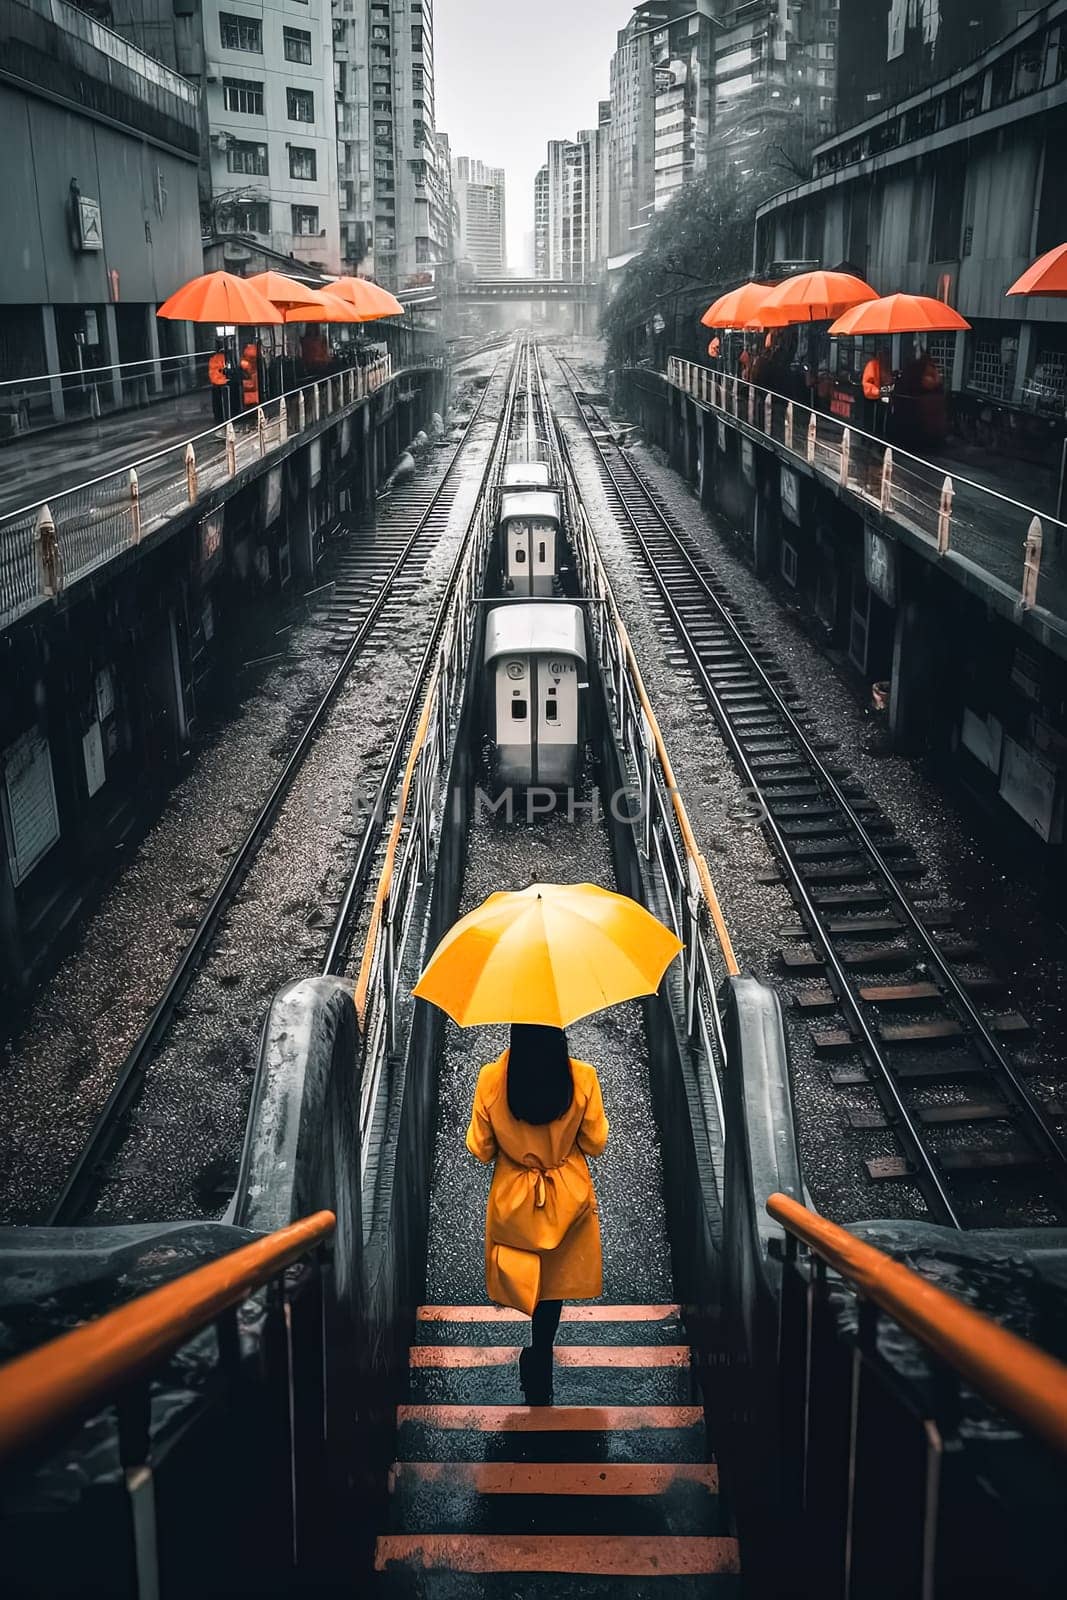 A woman in a yellow coat is walking down a train platform with an umbrella. The image has a mood of melancholy and loneliness, as the woman is alone on the platform